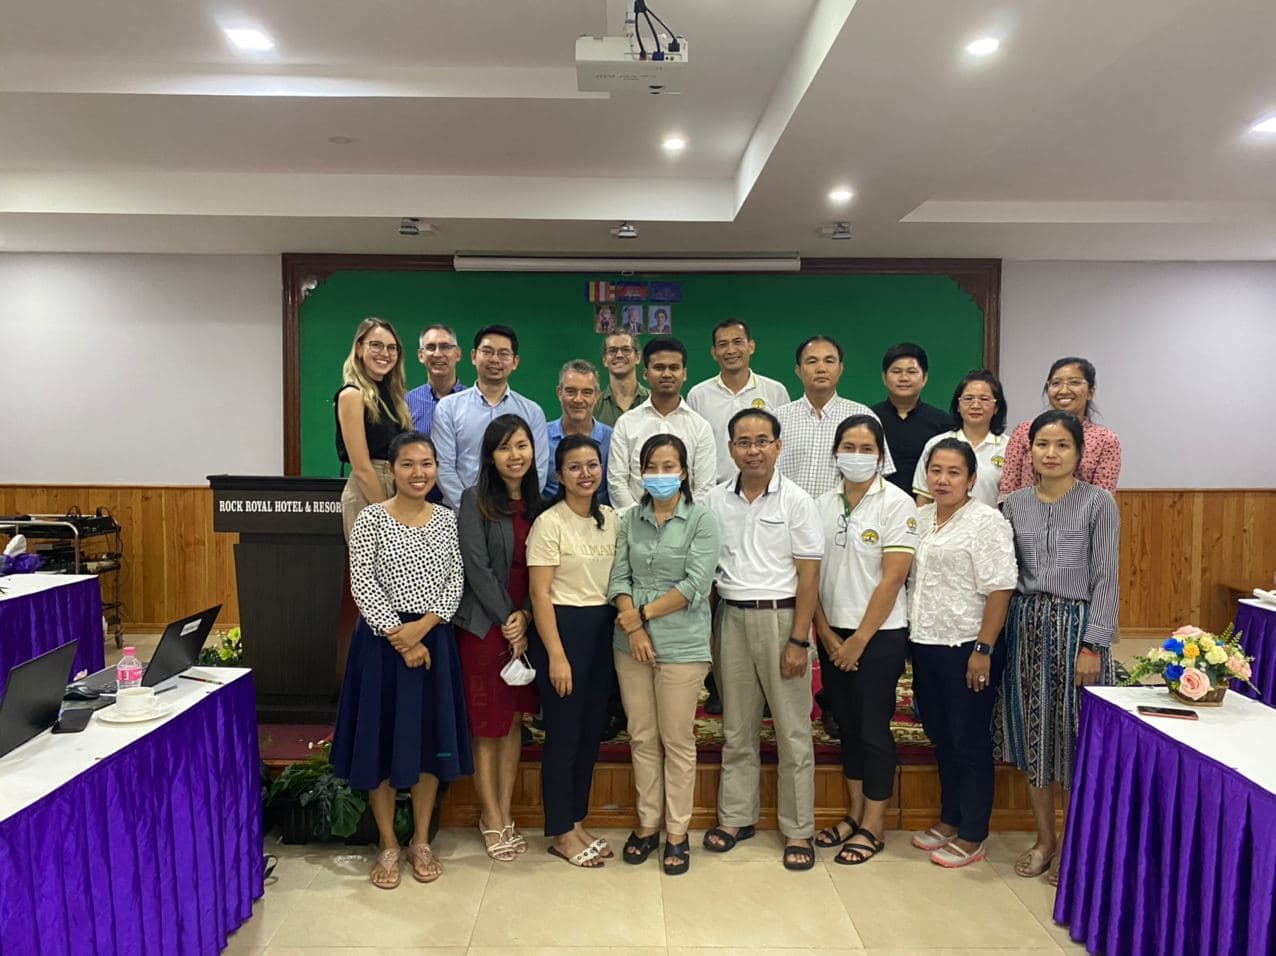 “Many calculations closer to monitoring UHC in Cambodia”